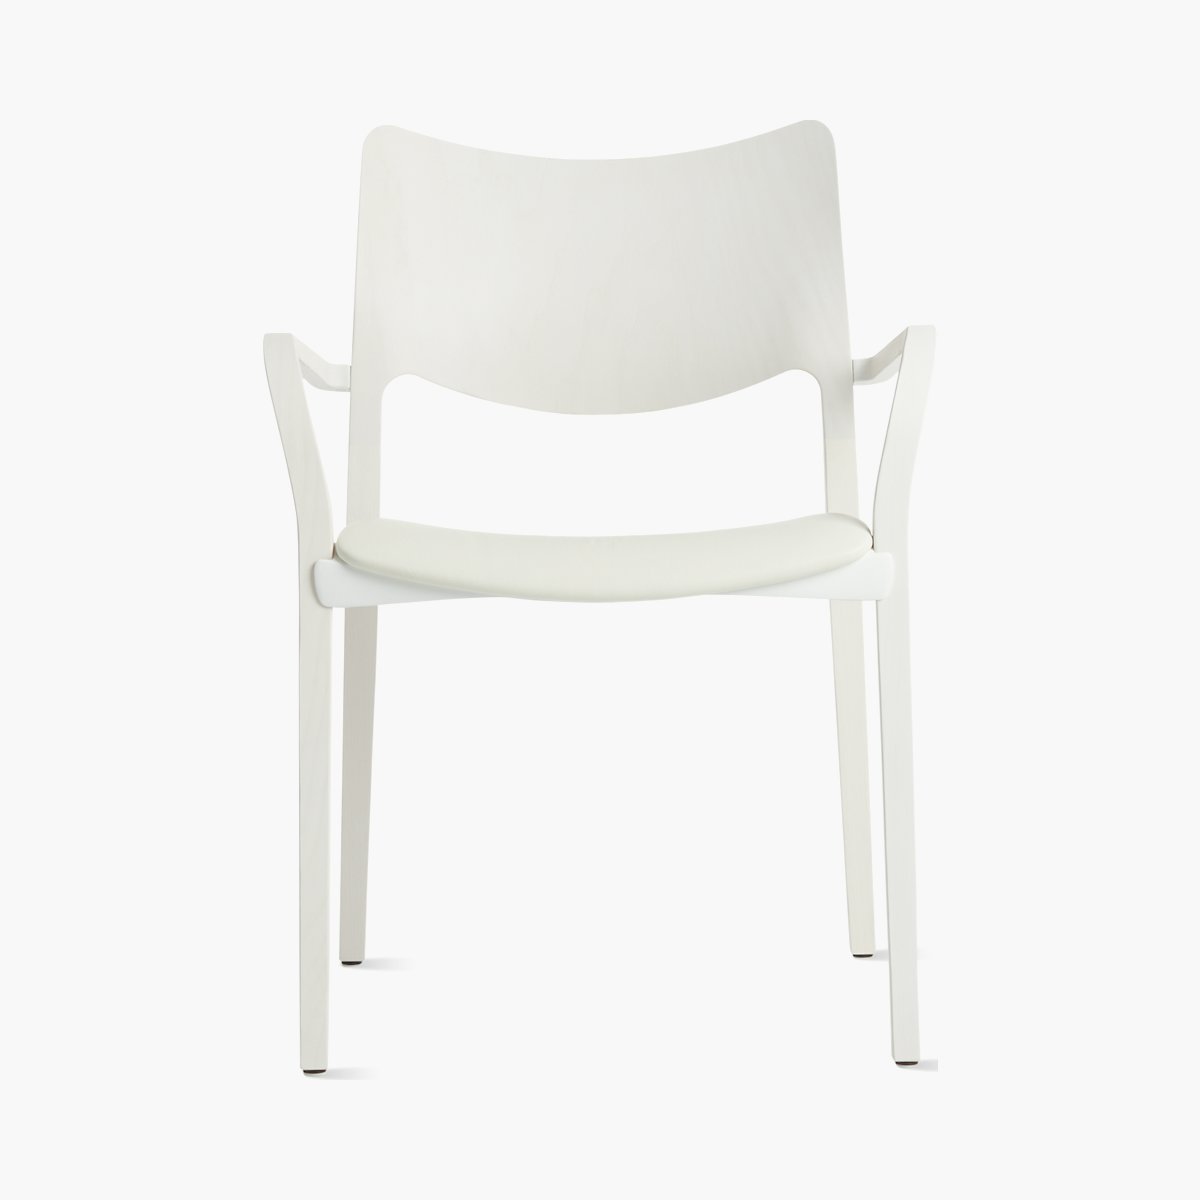 Laclasica Armchair, Upholstered